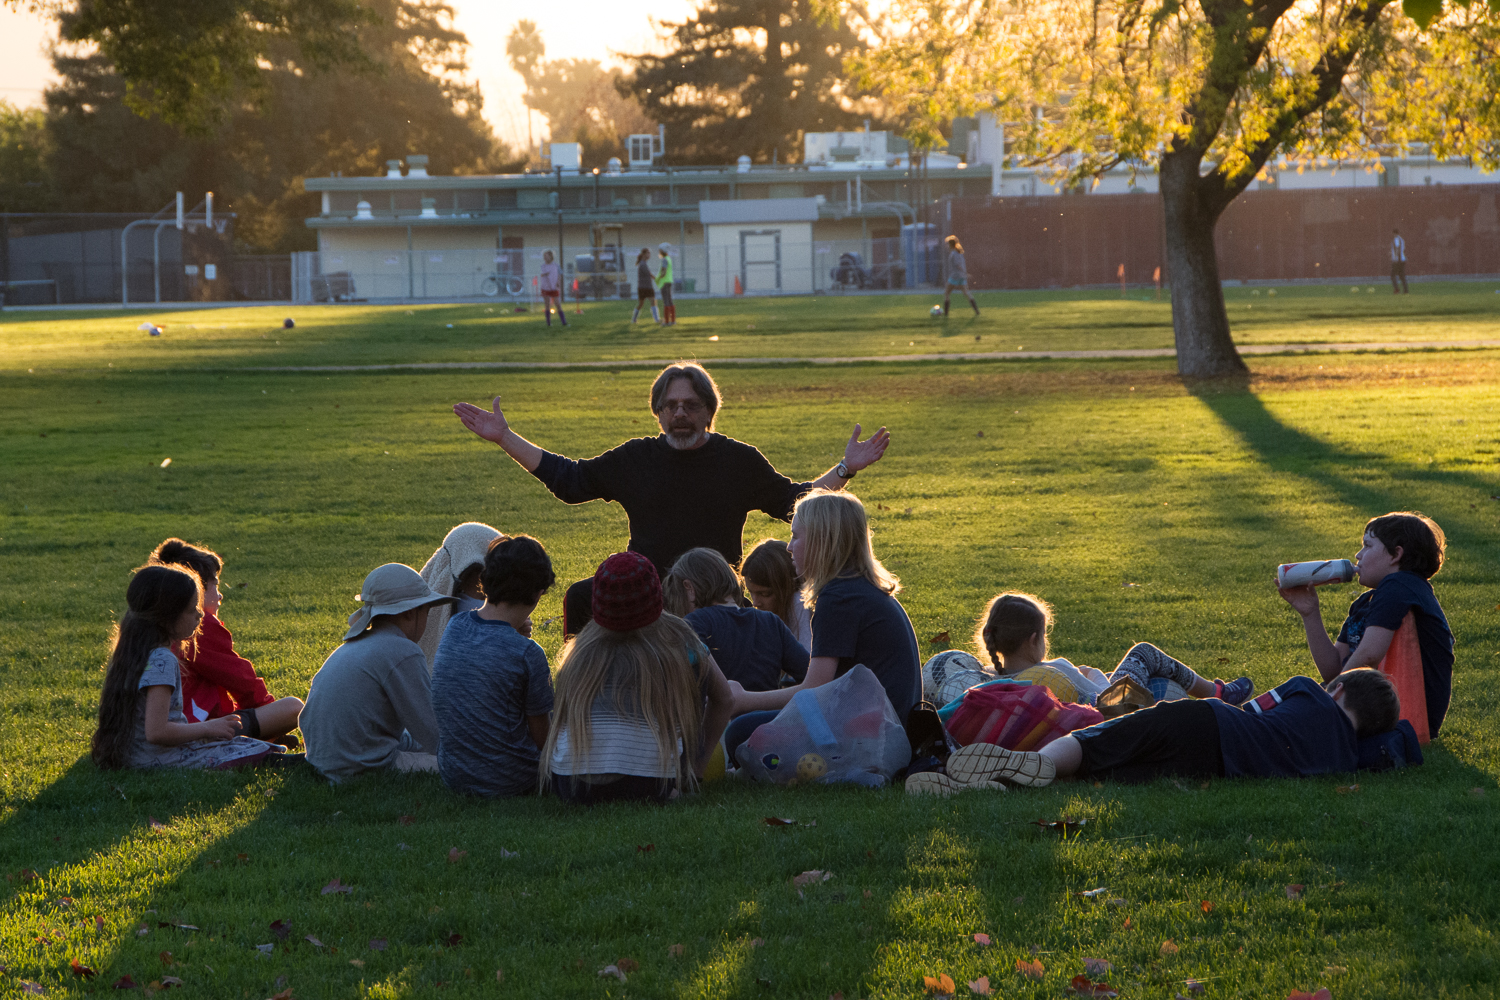 Man with arms raised speaks to a group of children sitting on the grass at dusk.